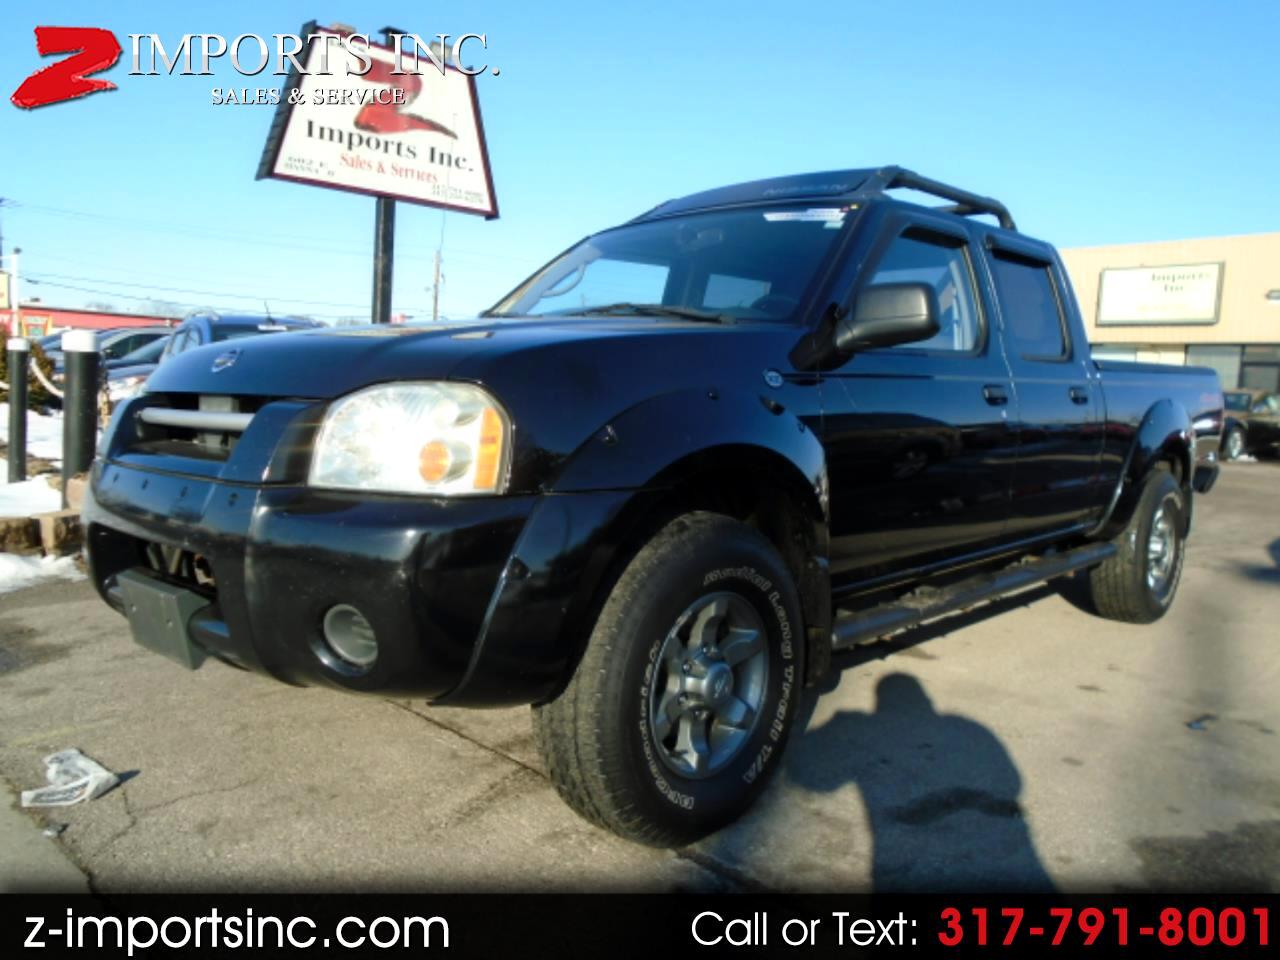 Used 2004 Nissan Frontier Xe V6 Crew Cab Long Bed 4wd For